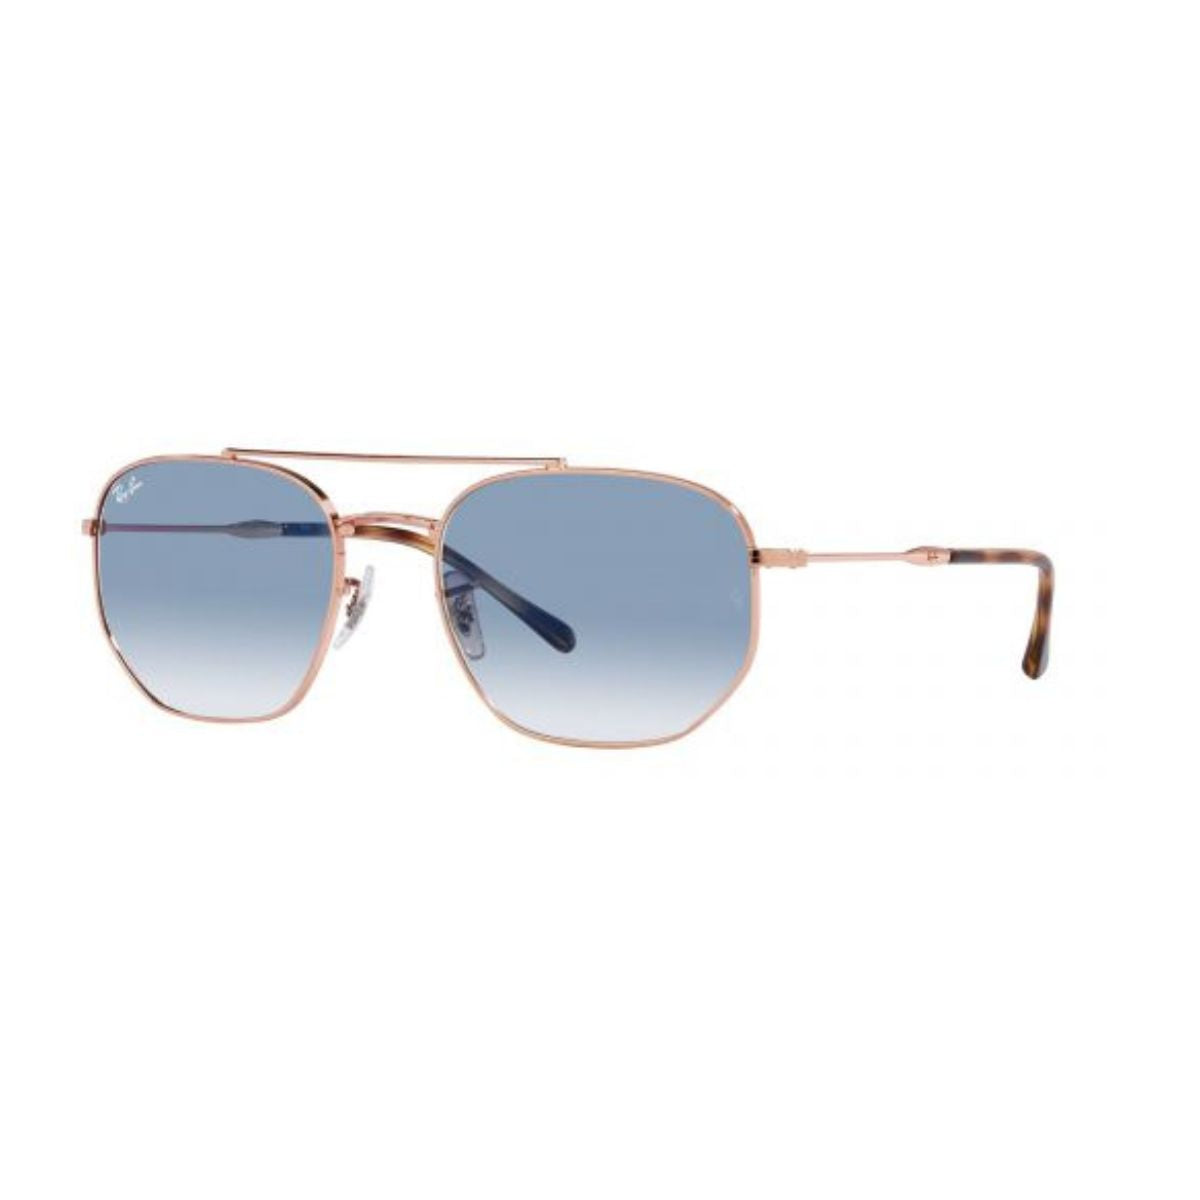 "Best Rayban 3796 9202/3f Blue Mirror With UV Protection Sunglass For Men At Optorium"